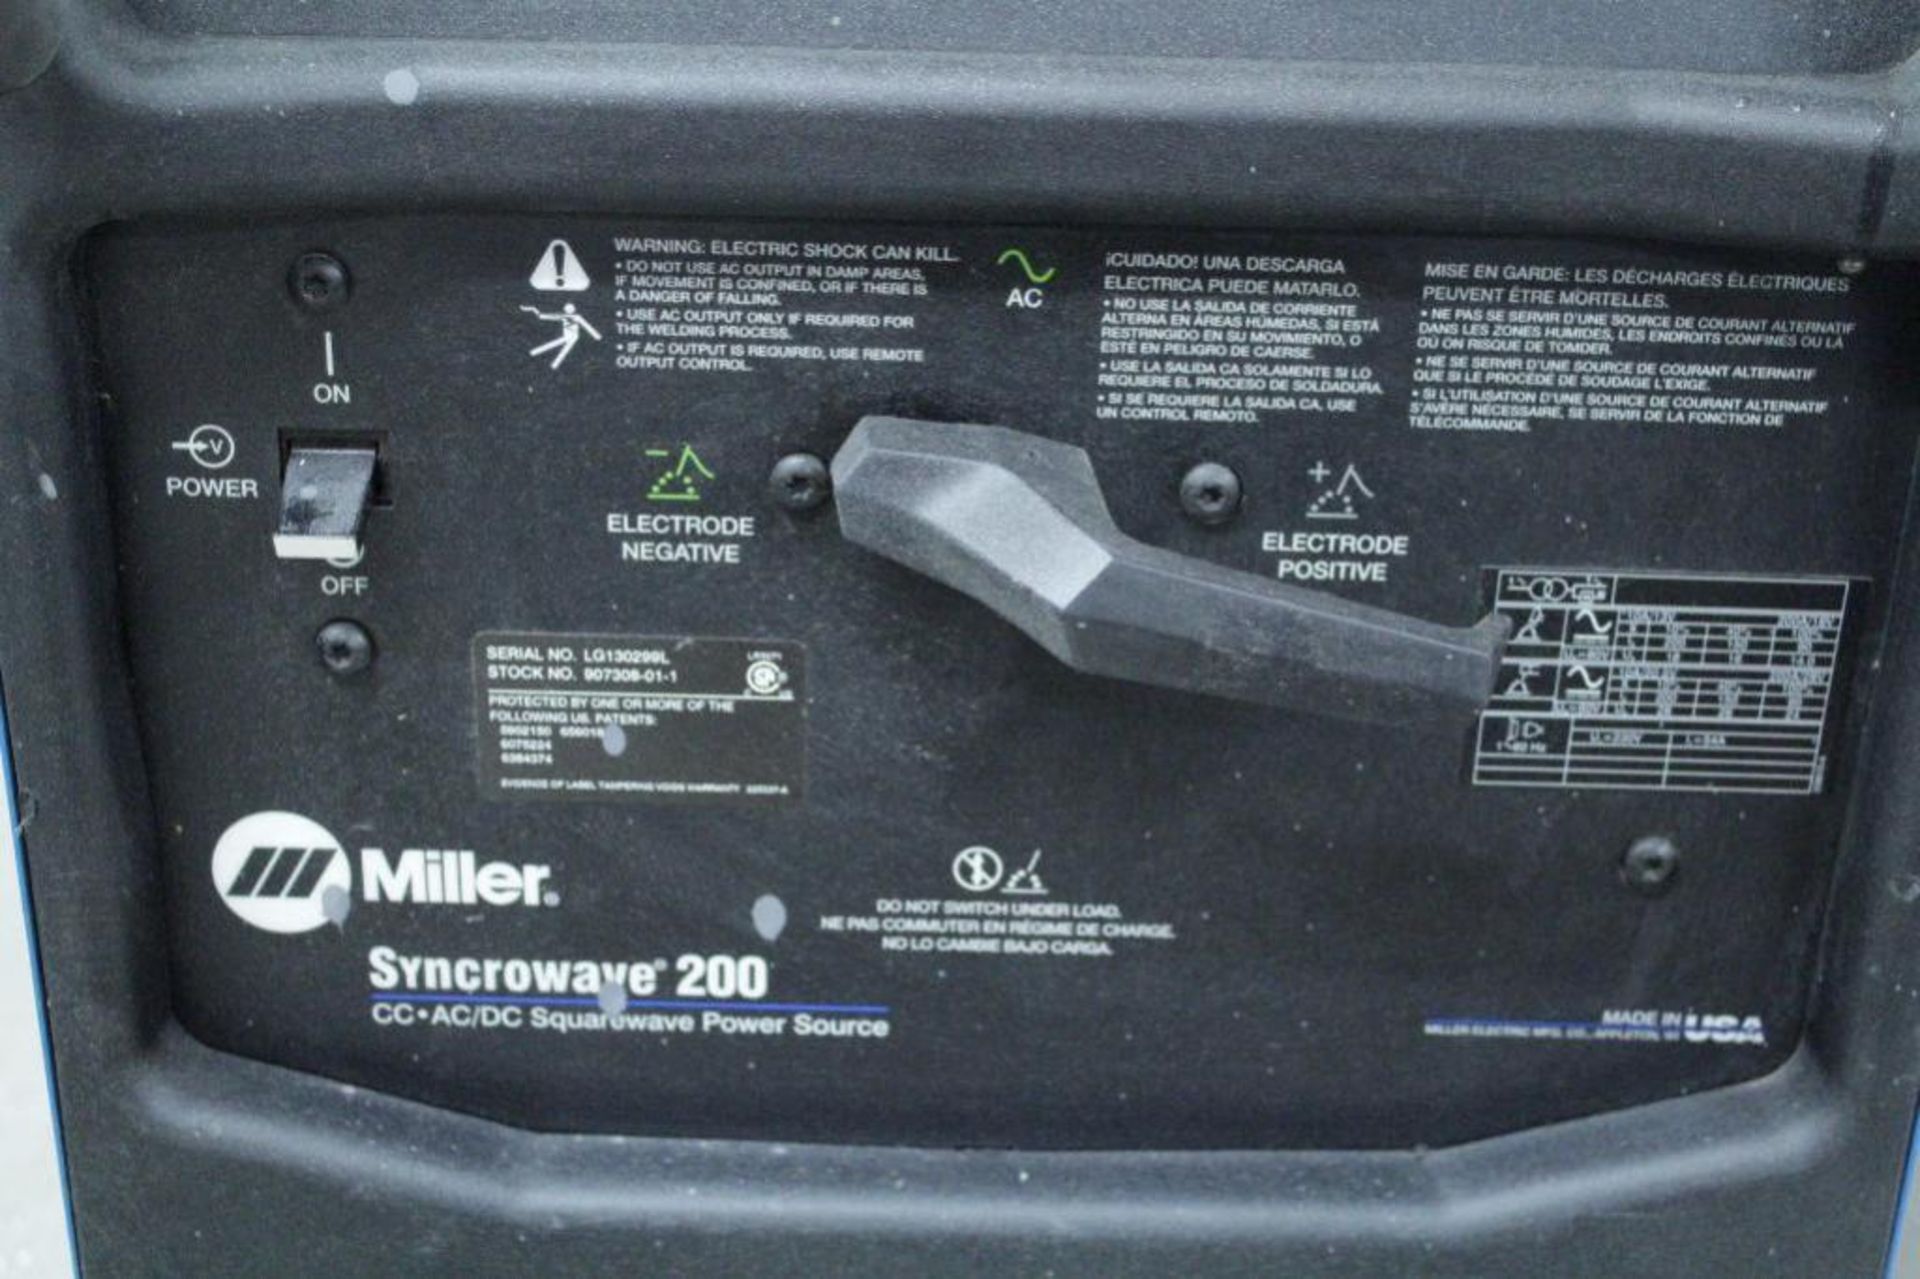 Miller Syncrowave 200 Power Source/welder, Stock No. 907308-01-1 - Image 2 of 3